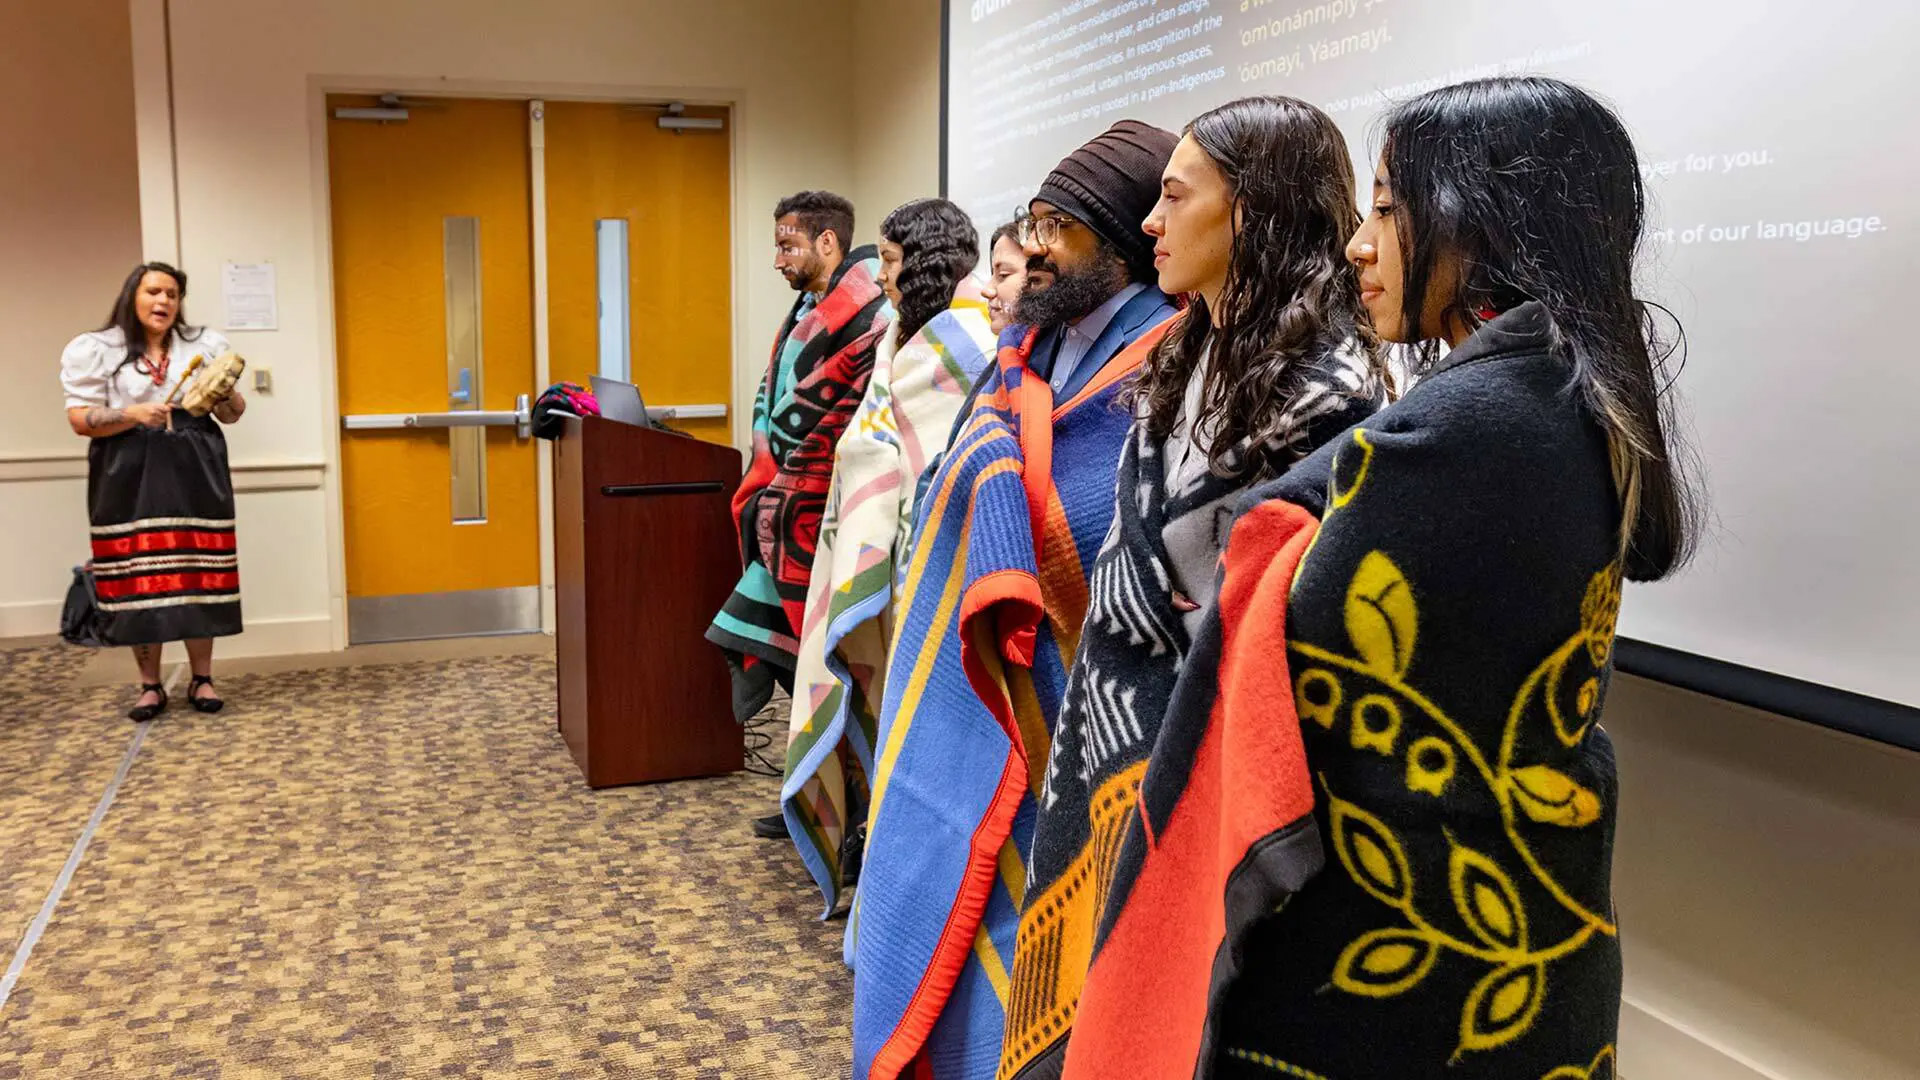 Graduating seniors with Native heritage were honored on Saturday at the university’s first blanket ceremony, a traditional Native celebration. Assistant Professor Shelbi Nahwilet Meissner led a drum ceremony at the event. Samuel Celentano, a December 2023 graduate (below), attended with his parents.